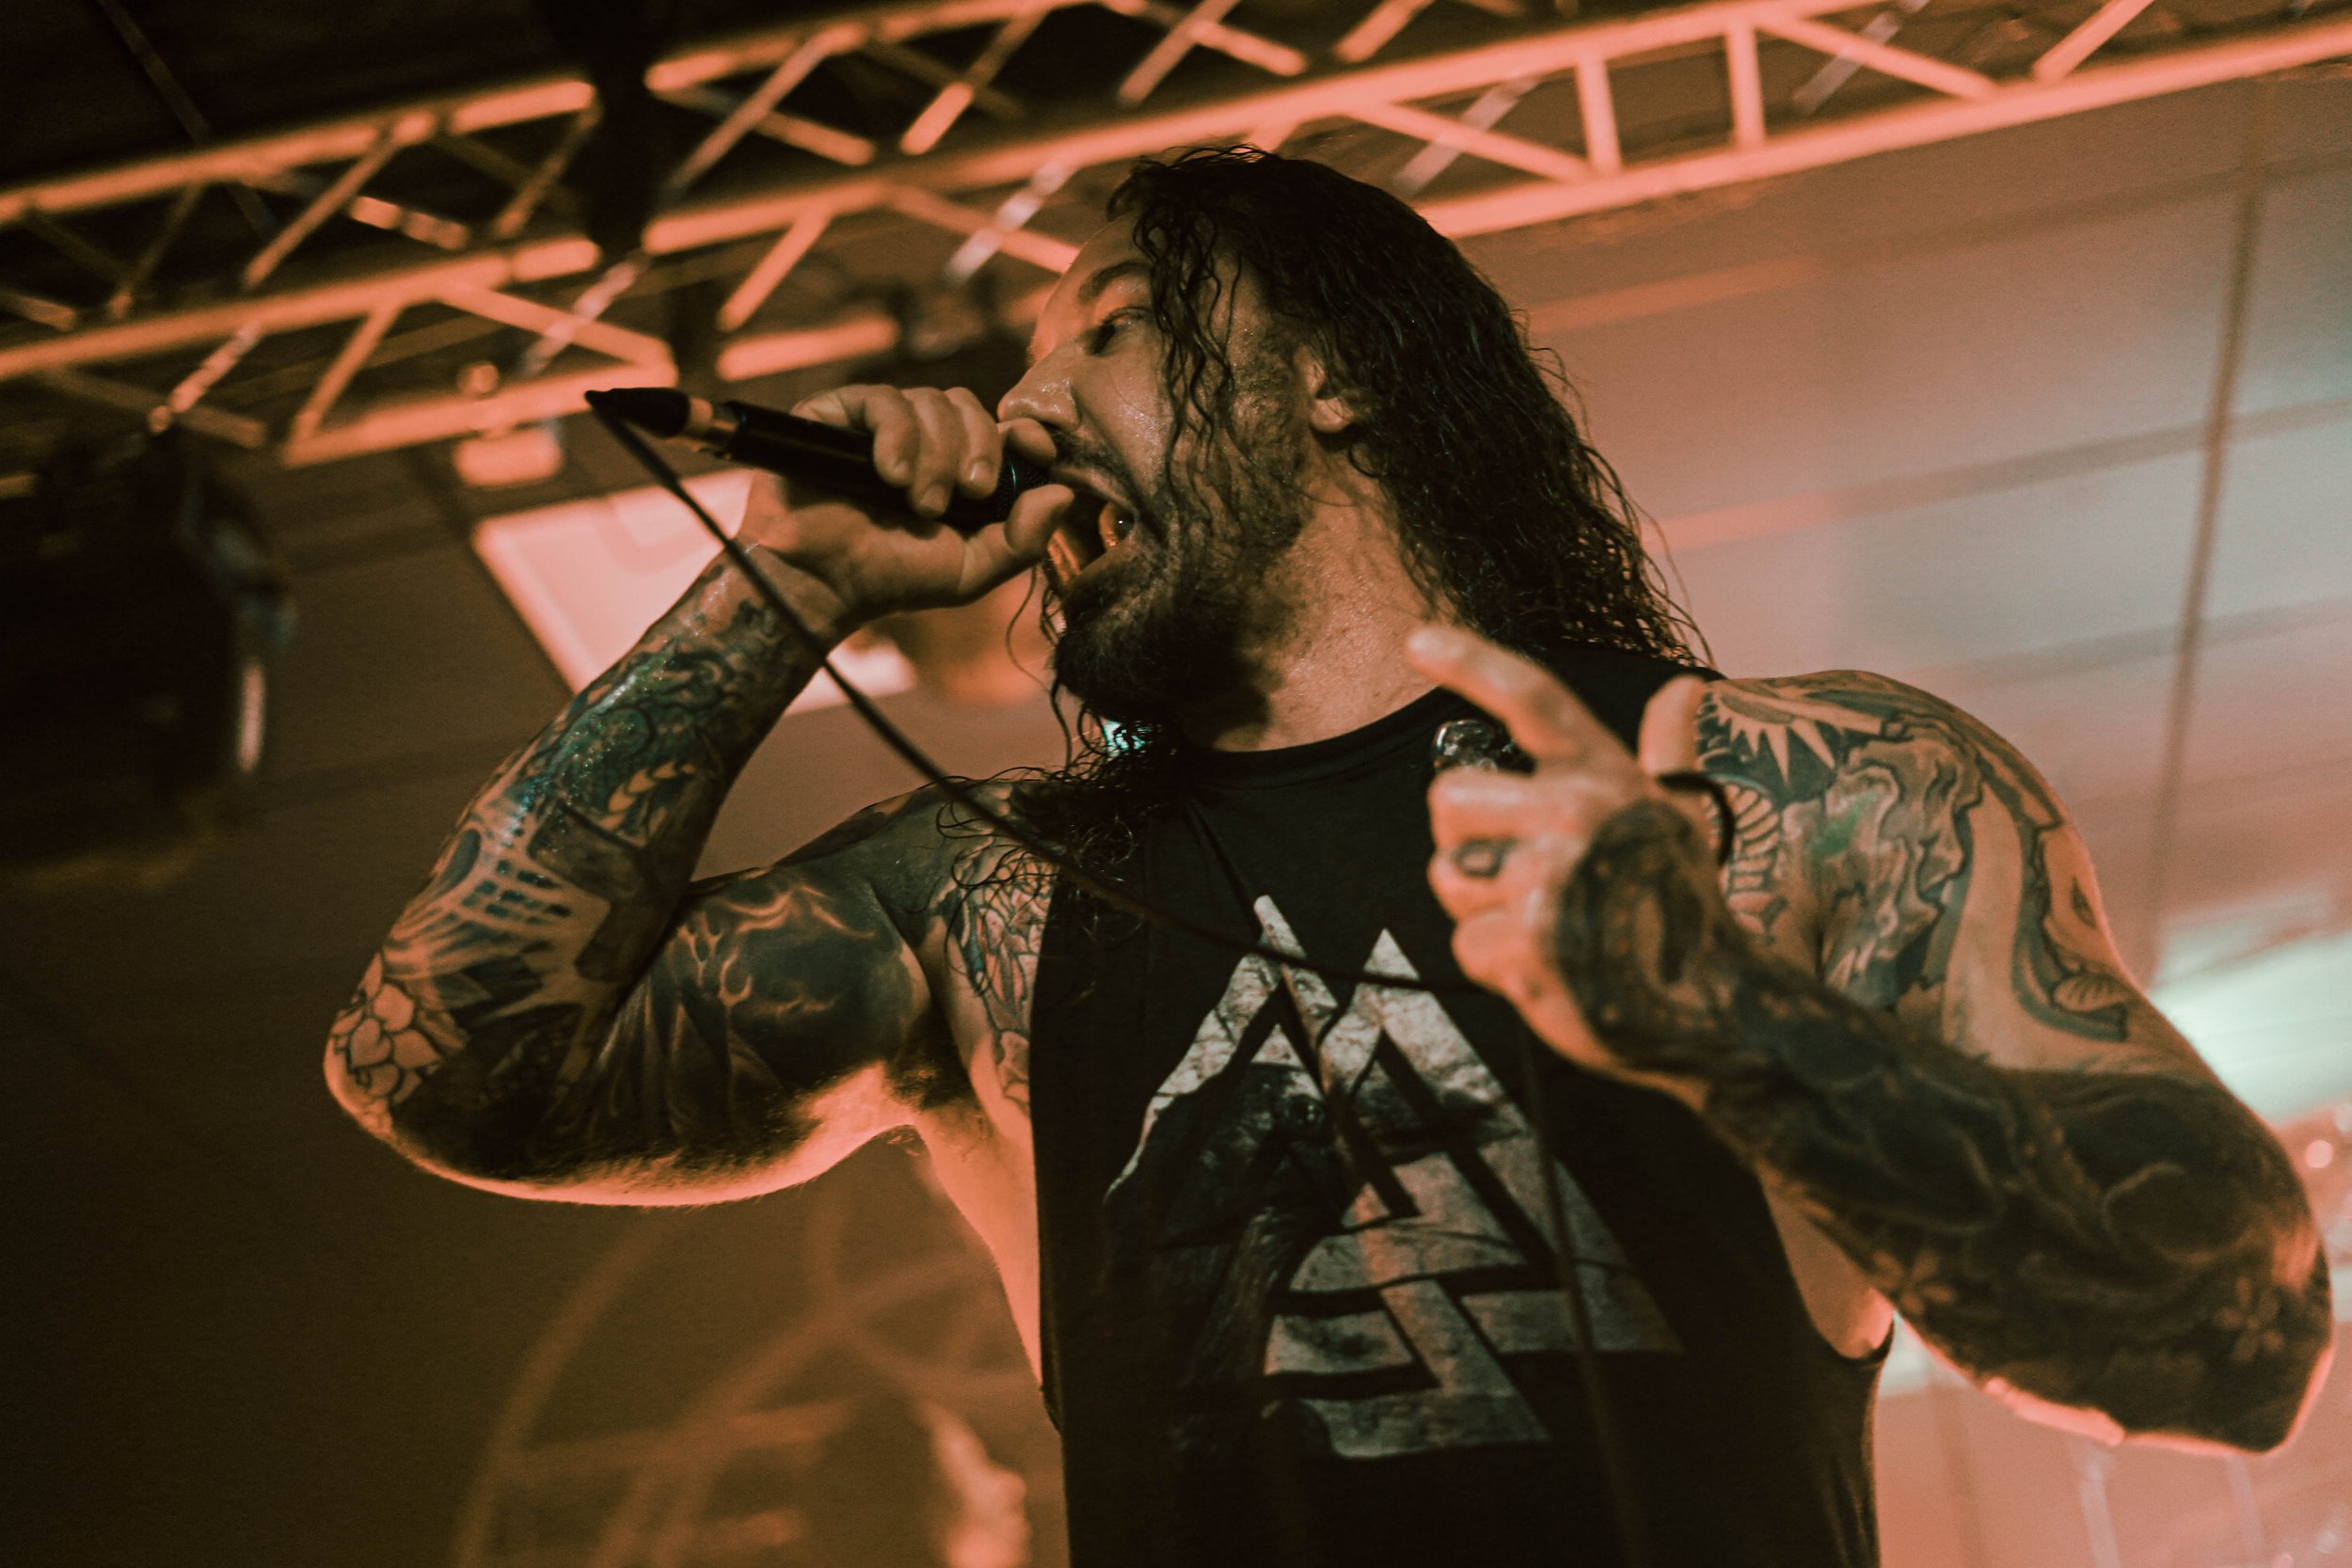 As I Lay Dying at The Concourse in Knoxville, TN